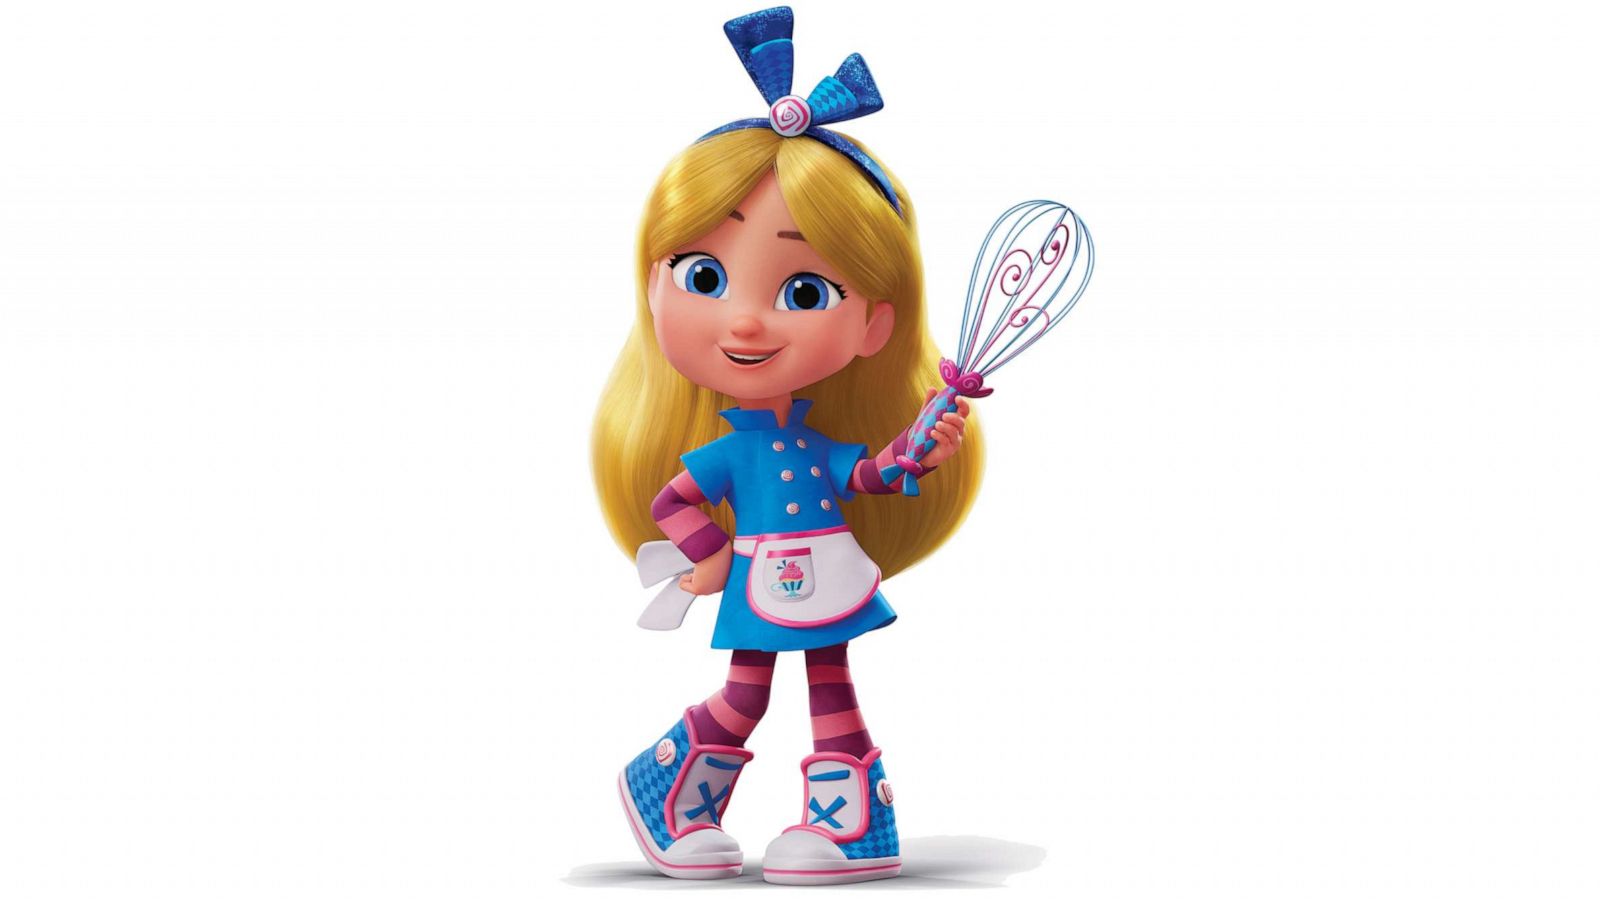 DTVA News on X: Wonderland's Bakery opens, so you better have your recipe  to bake with Alice! #AlicesWonderlandBakery will have @DisneyBooks in  Summer 2022. Where There's a Whisk, There's a Way 7/5/22